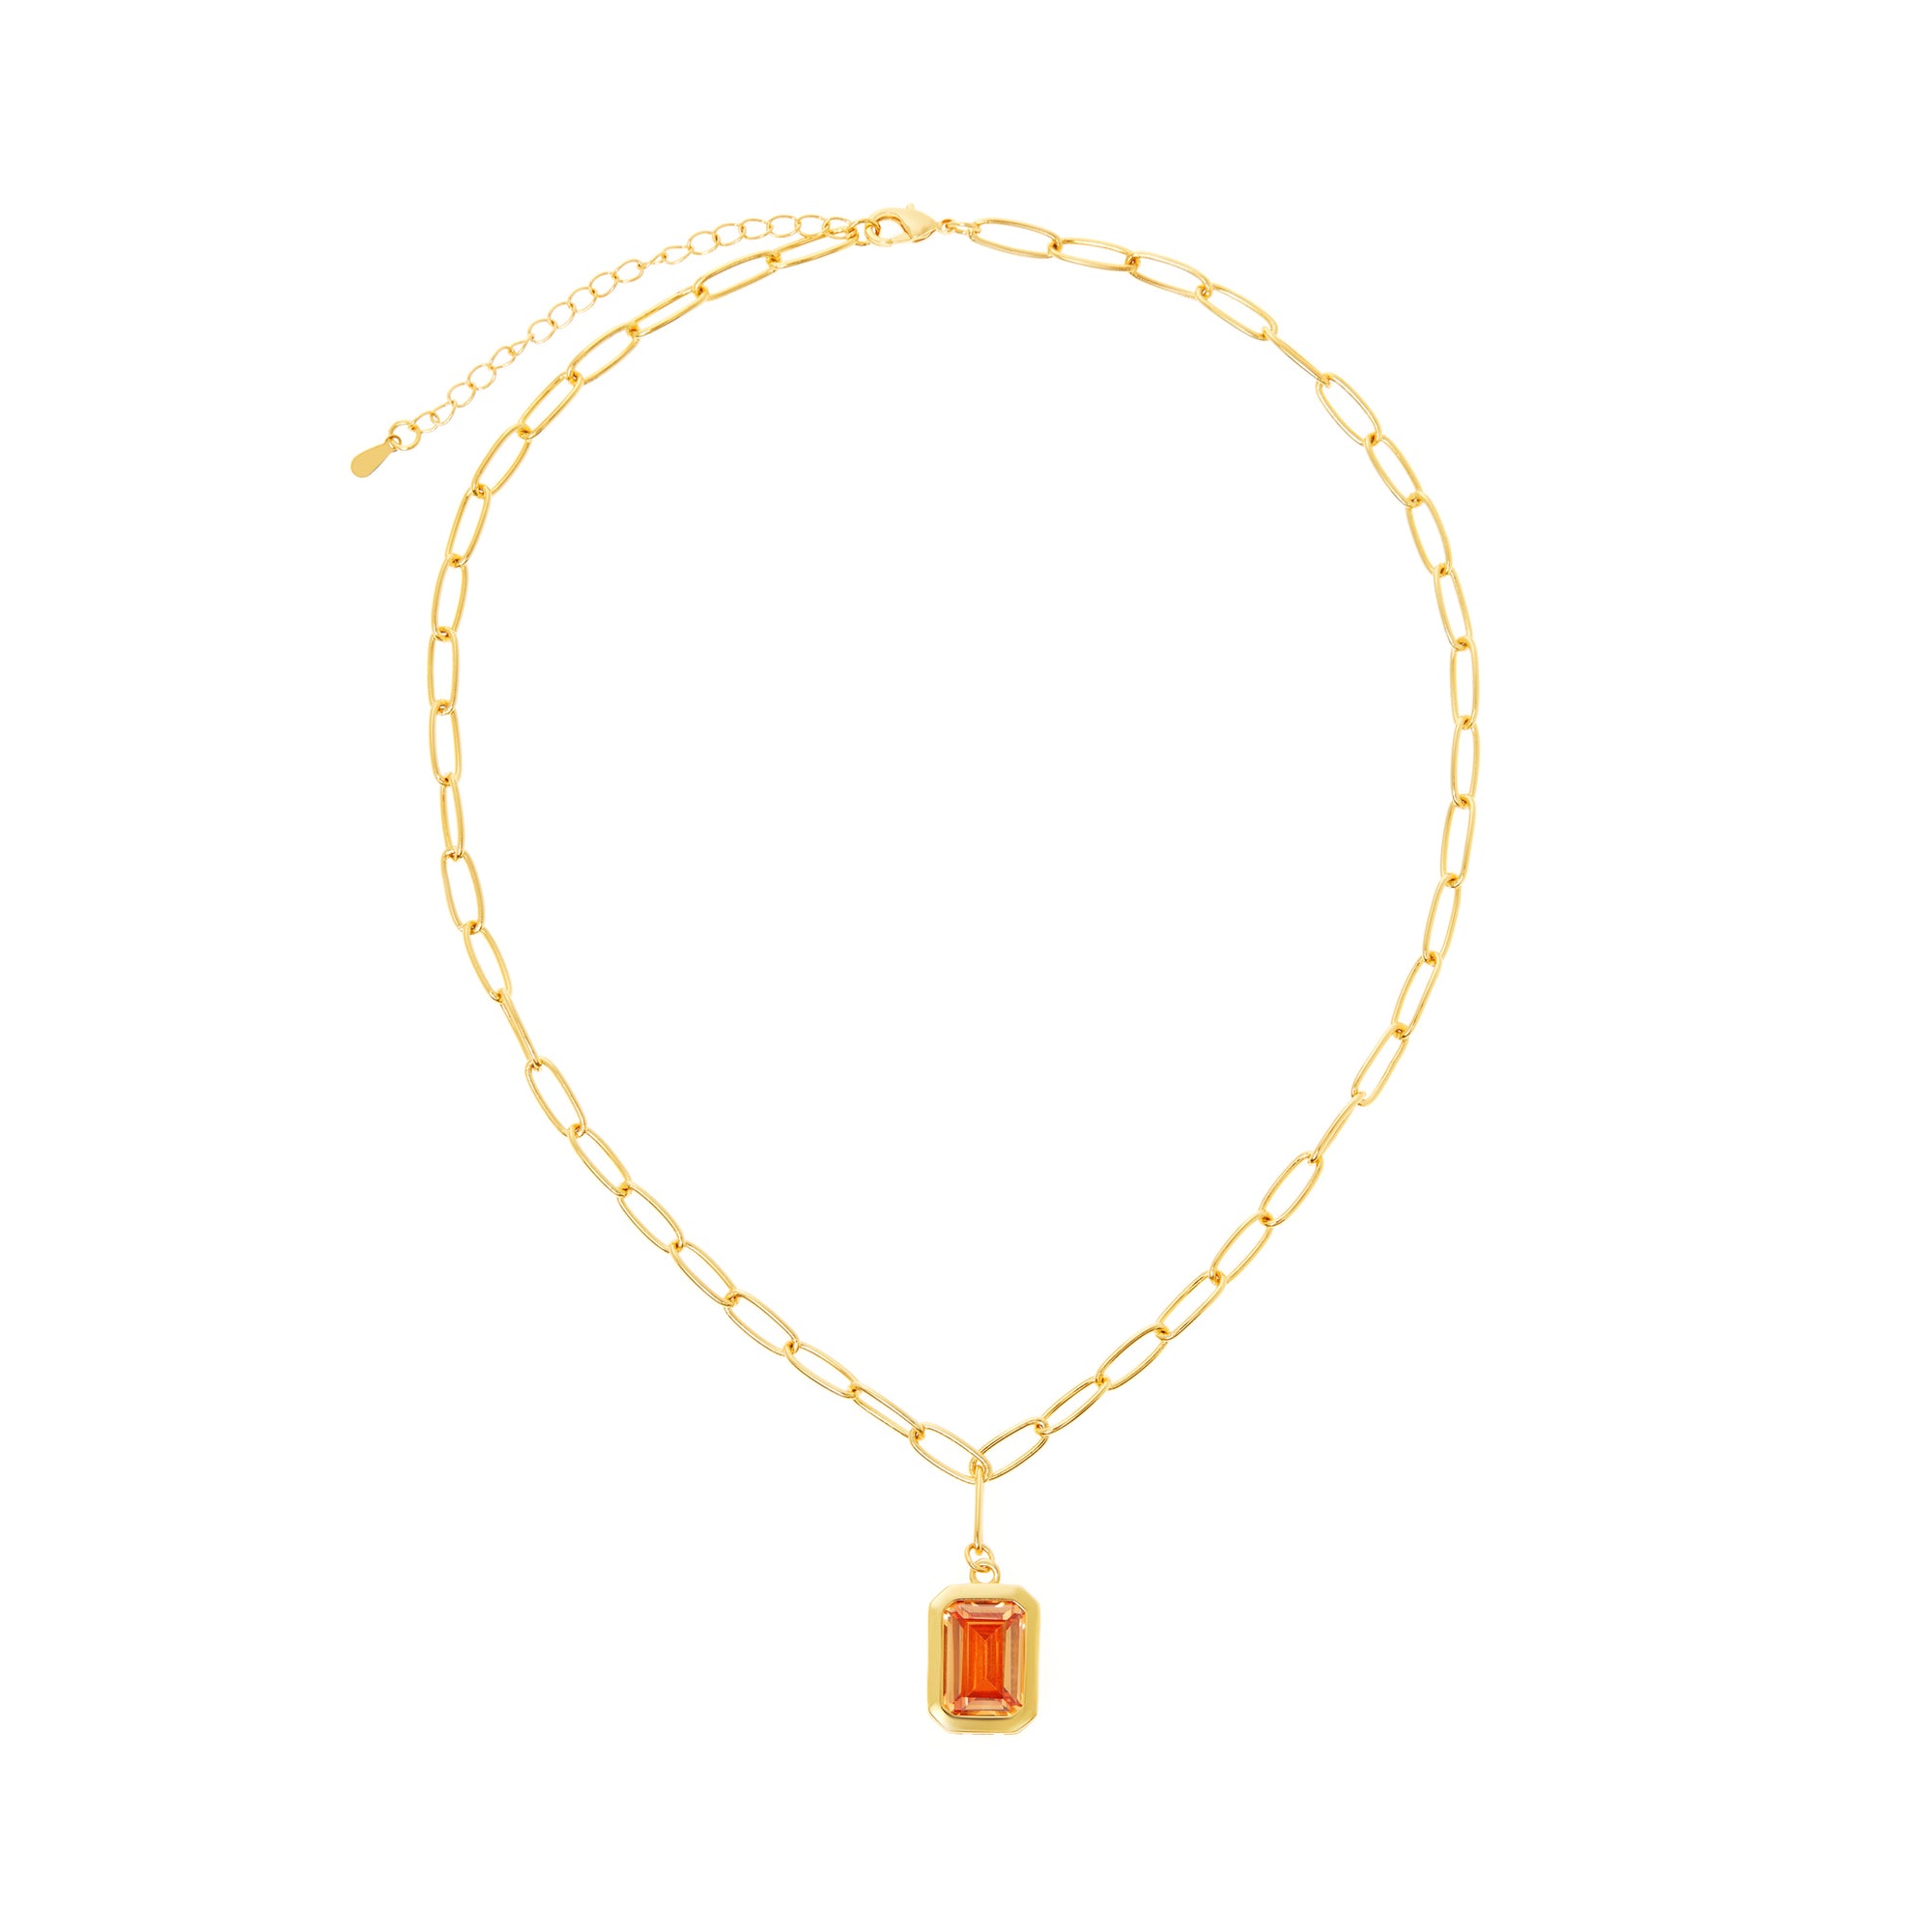 Necklace 'Piped Edge' – Caramel